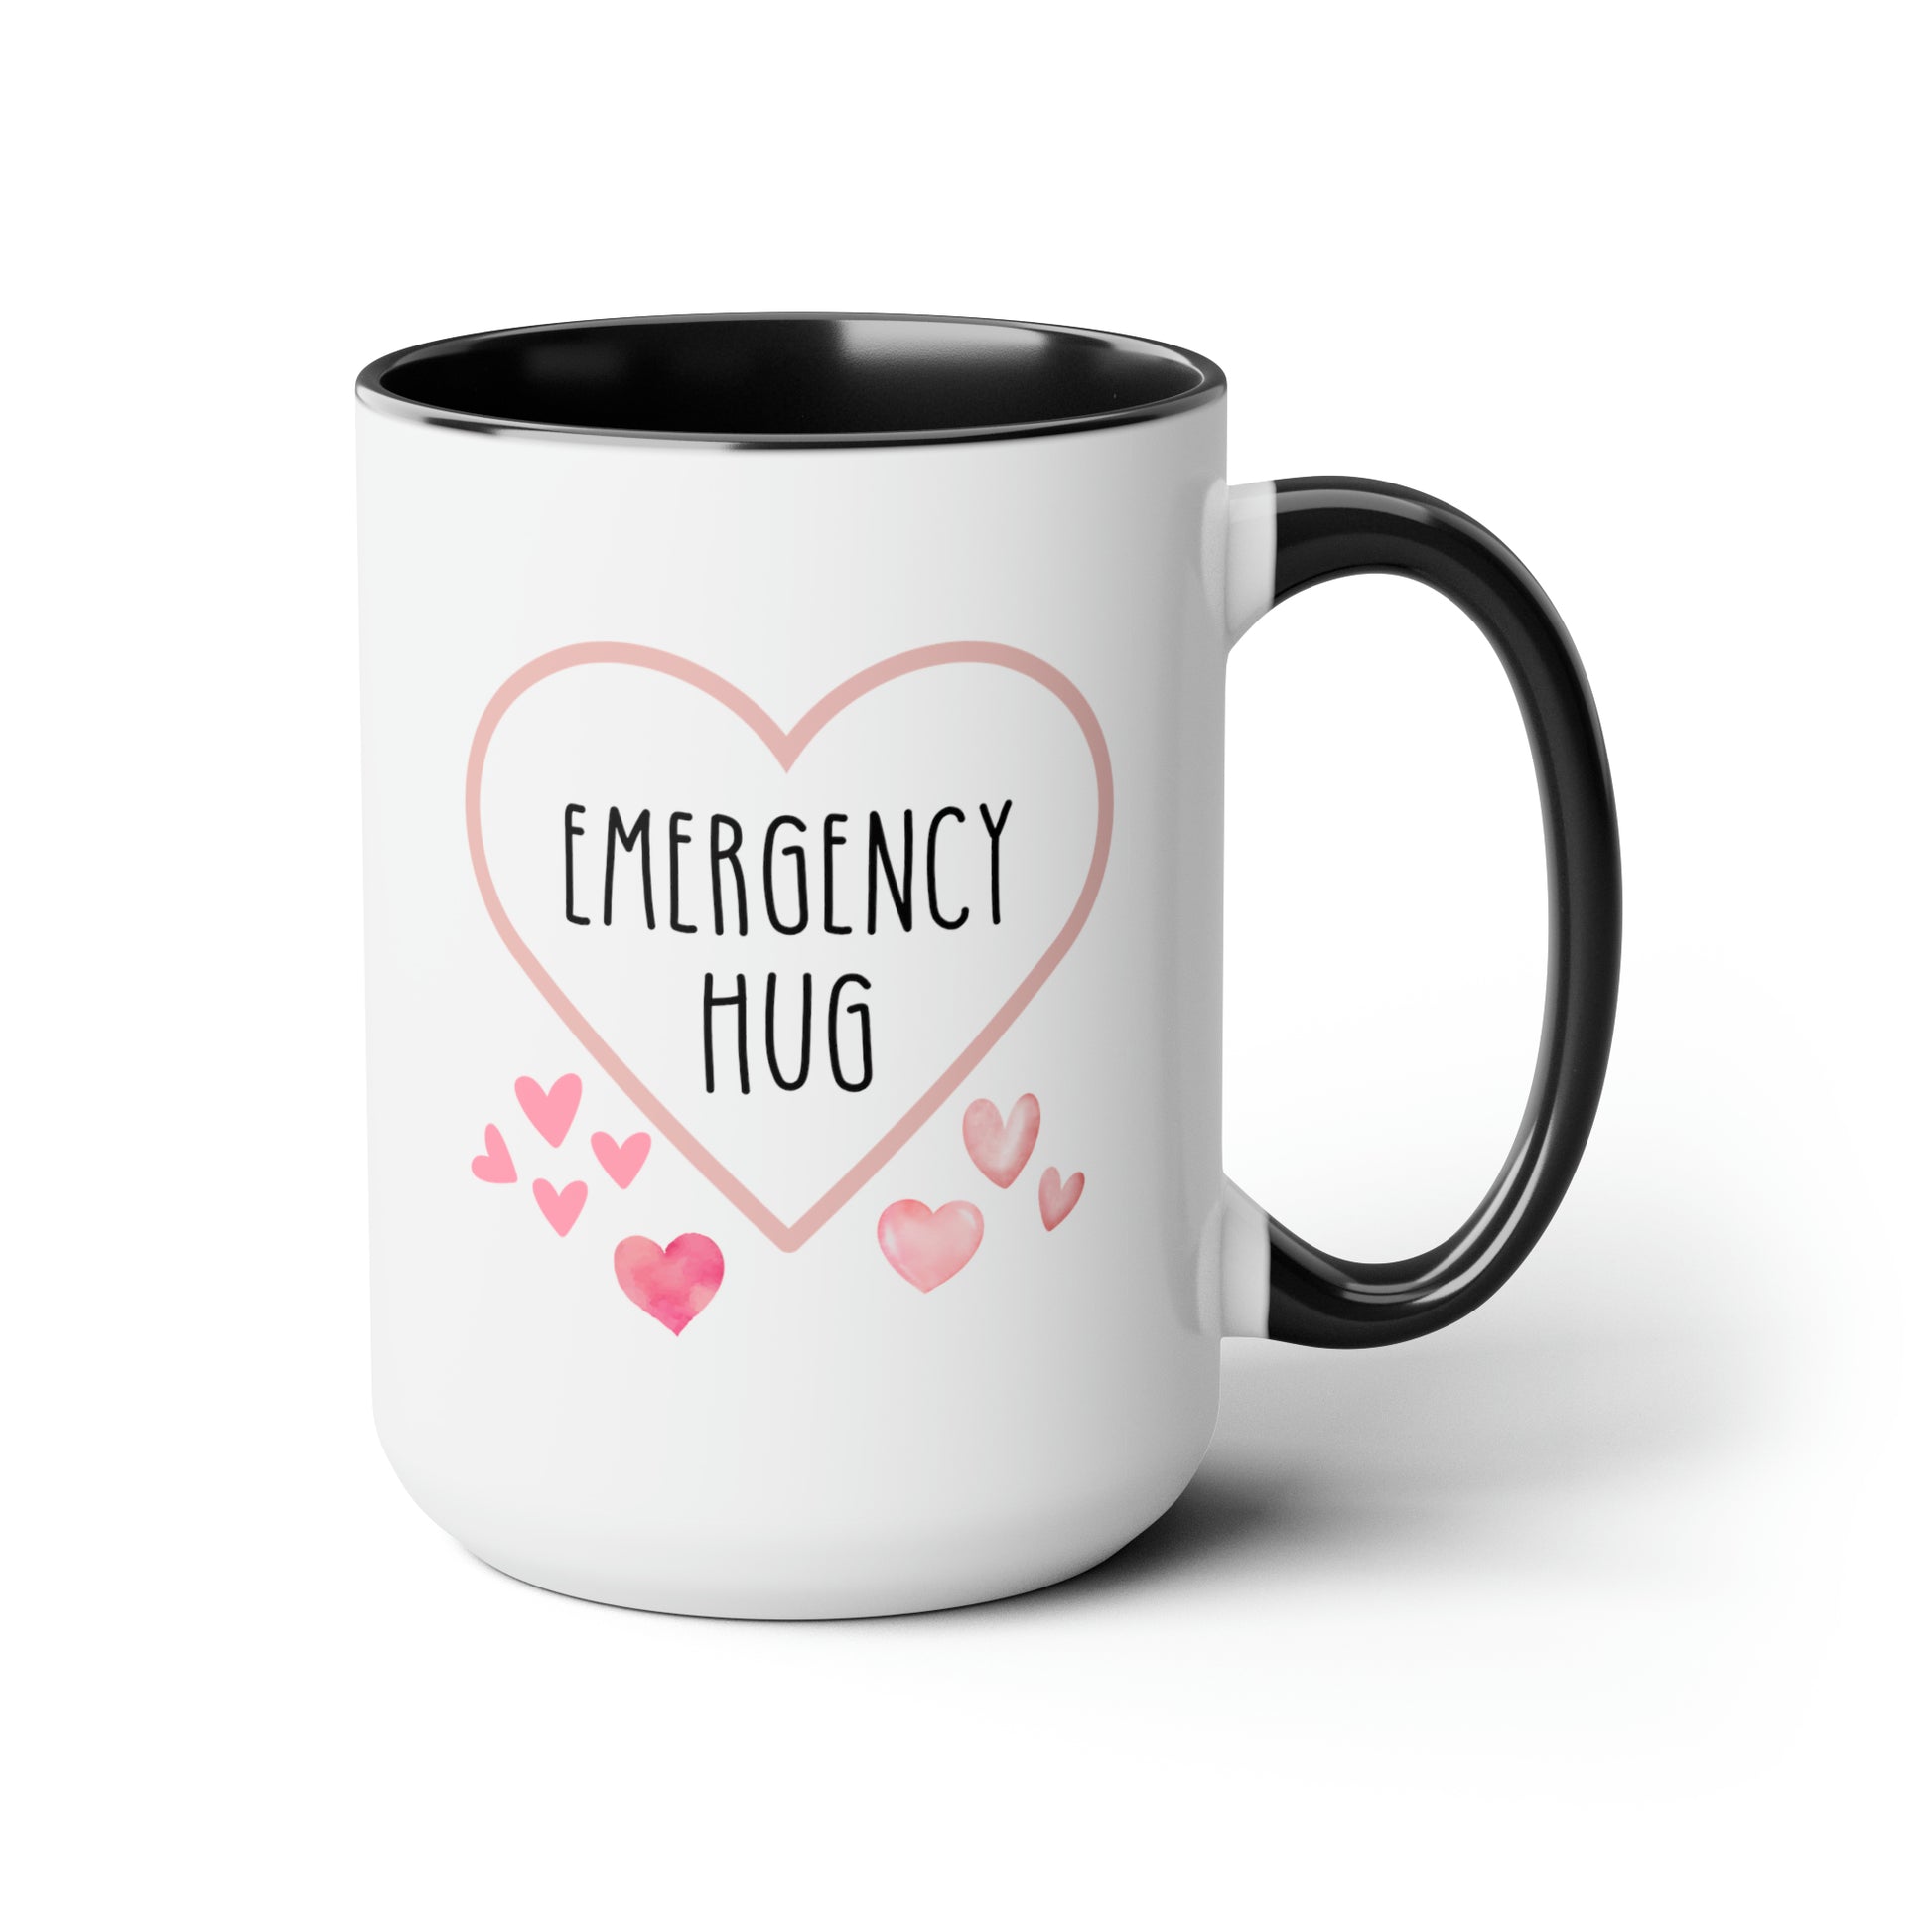 Emergency Hug 15oz white with black accent funny large coffee mug gift for mental health comforting uplifting encouraging anxiety pocket waveywares wavey wares wavywares wavy wares